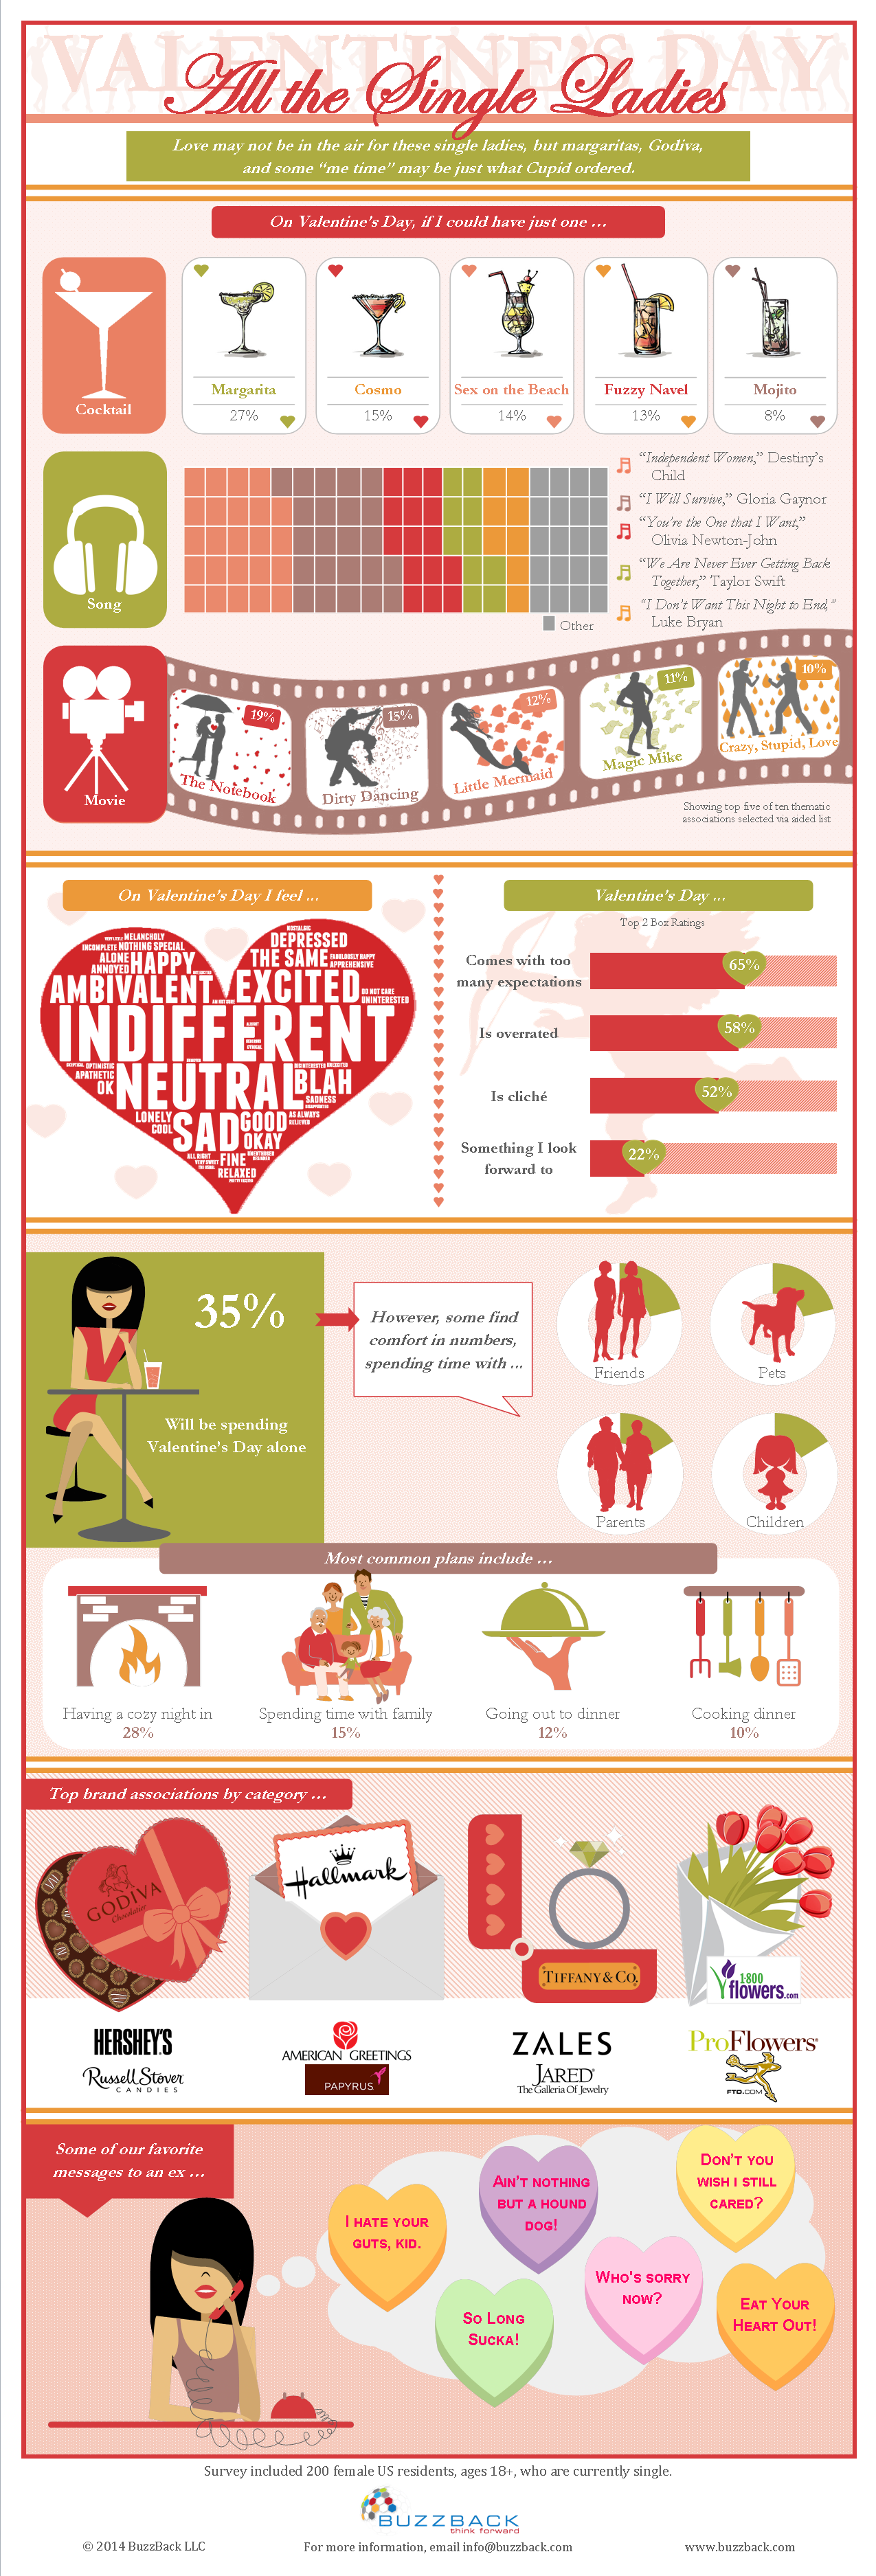 Valentines-Day-Infographic-2014-FINAL-2